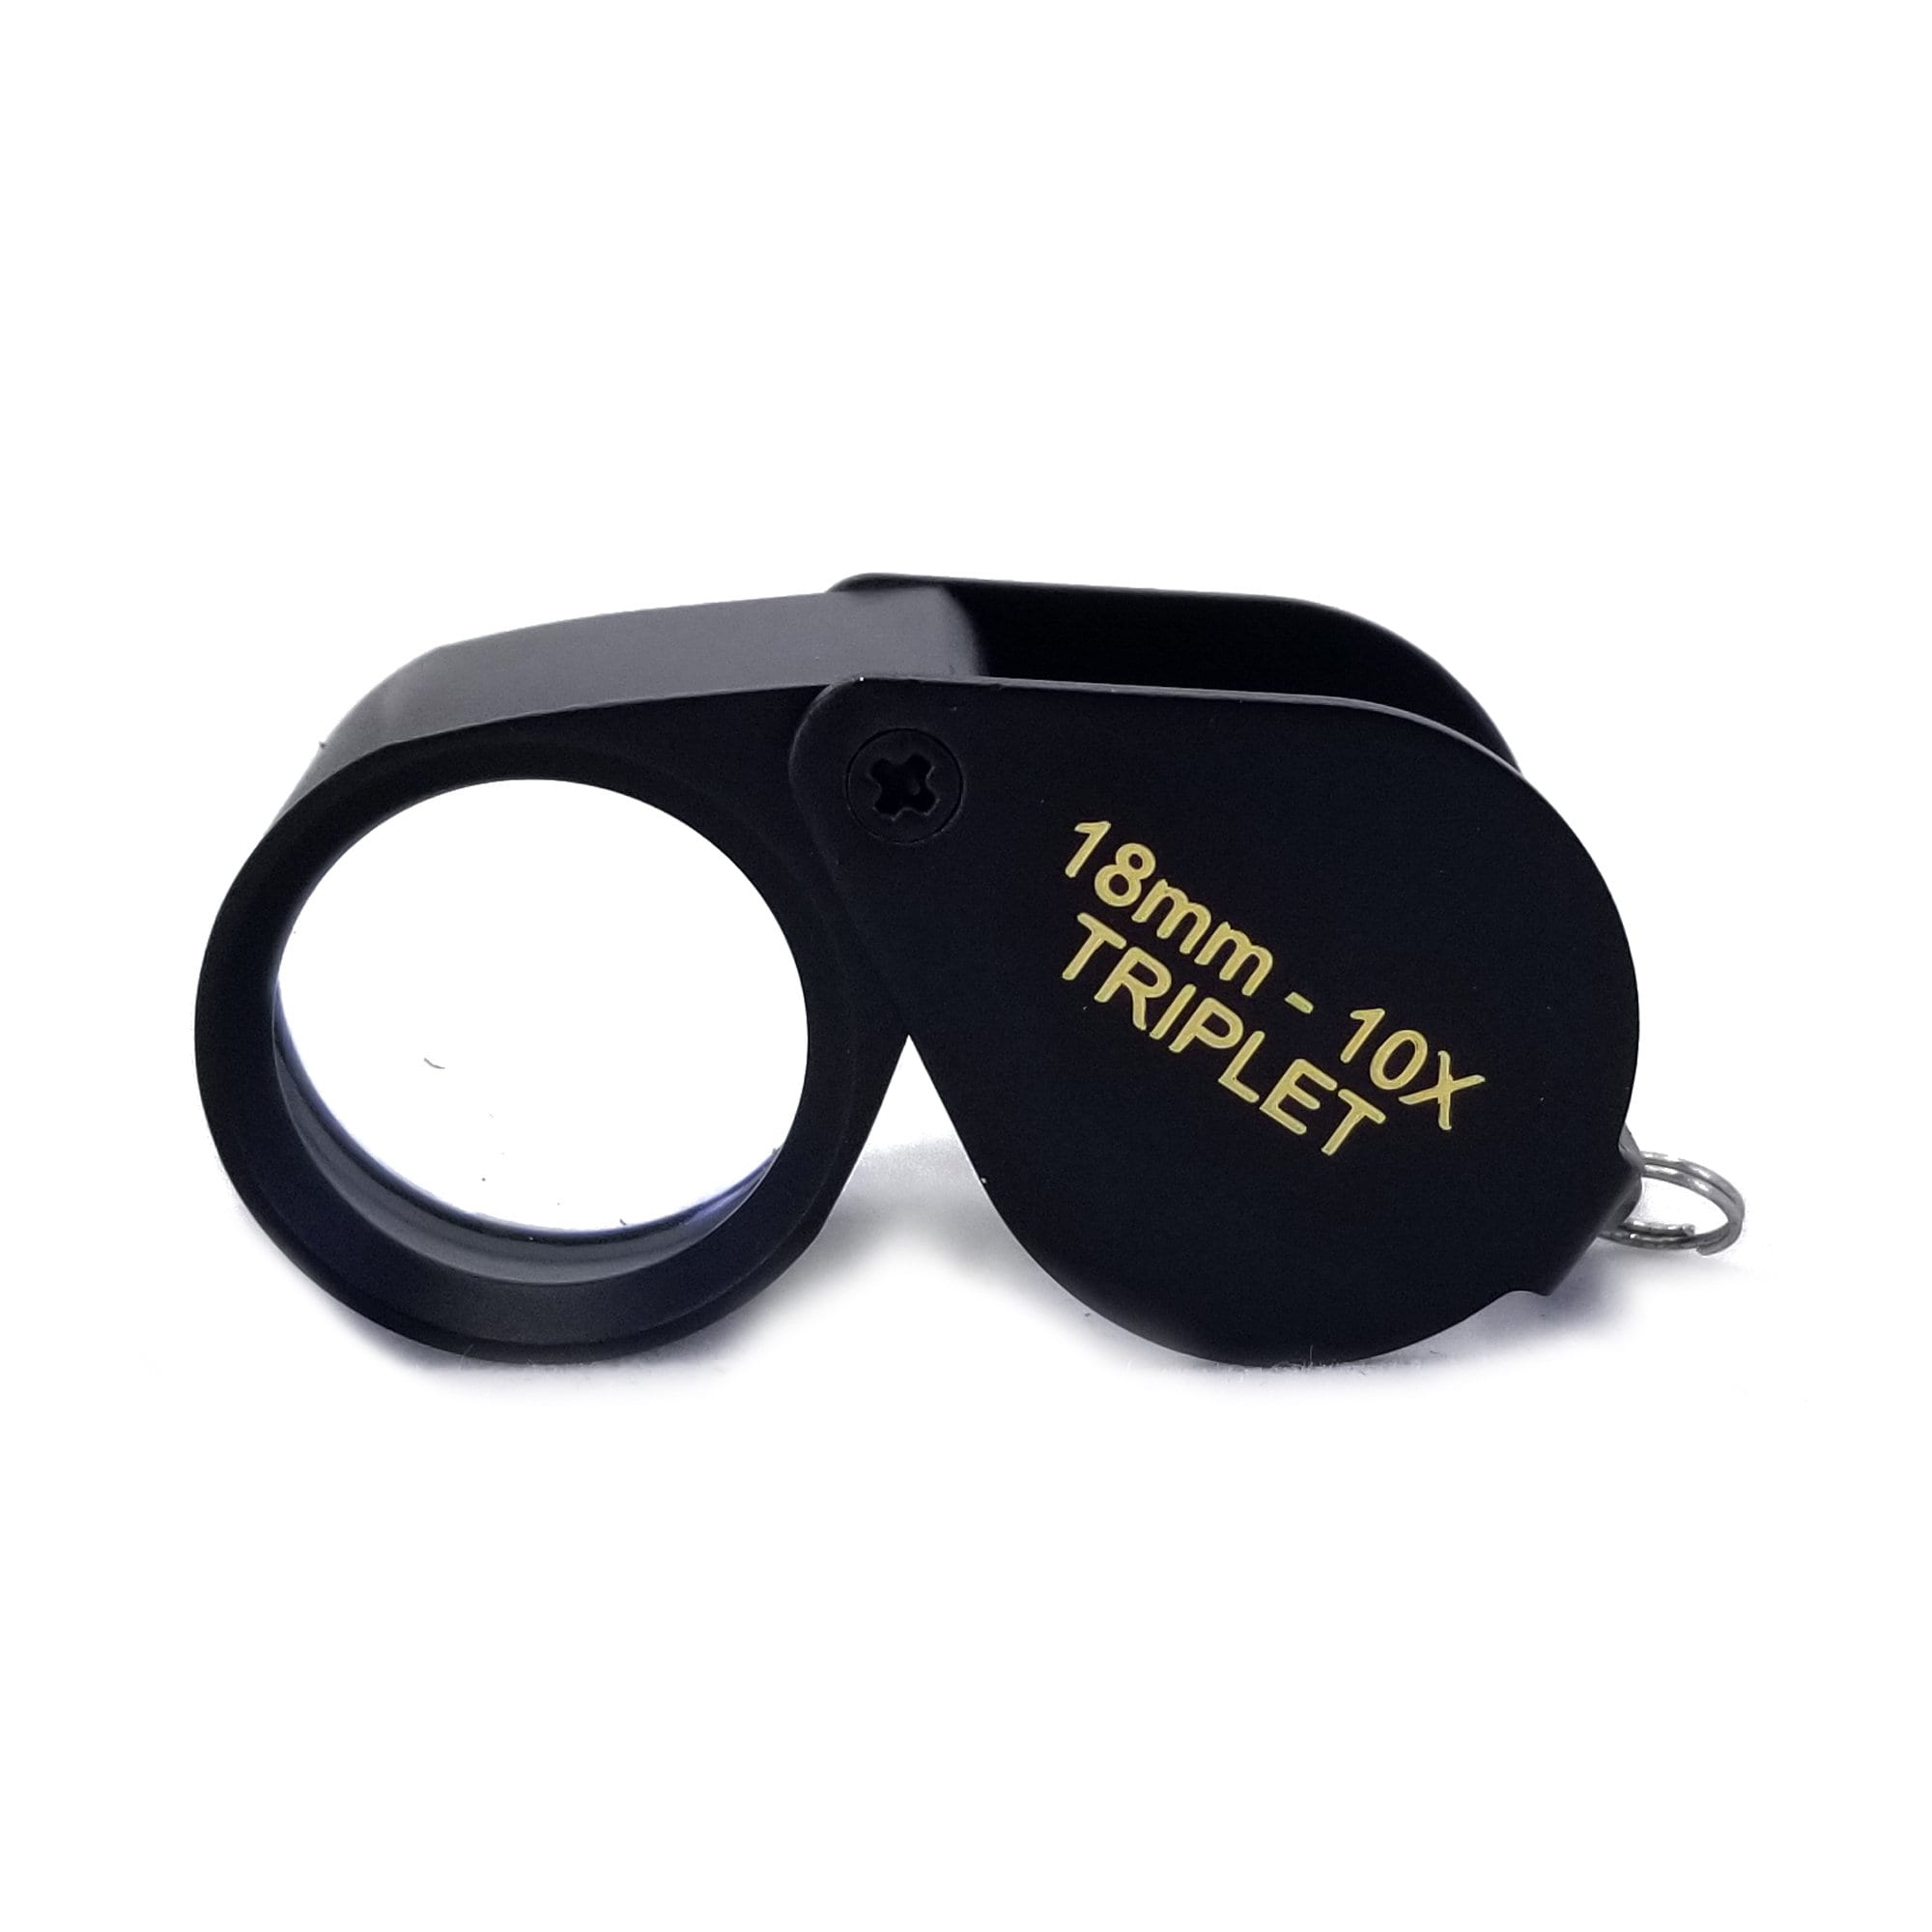 GENEMA 20X Jewelers Eye Loupe Loop Magnifier Magnifying Glass Watchmakers  Jewelry Tools 